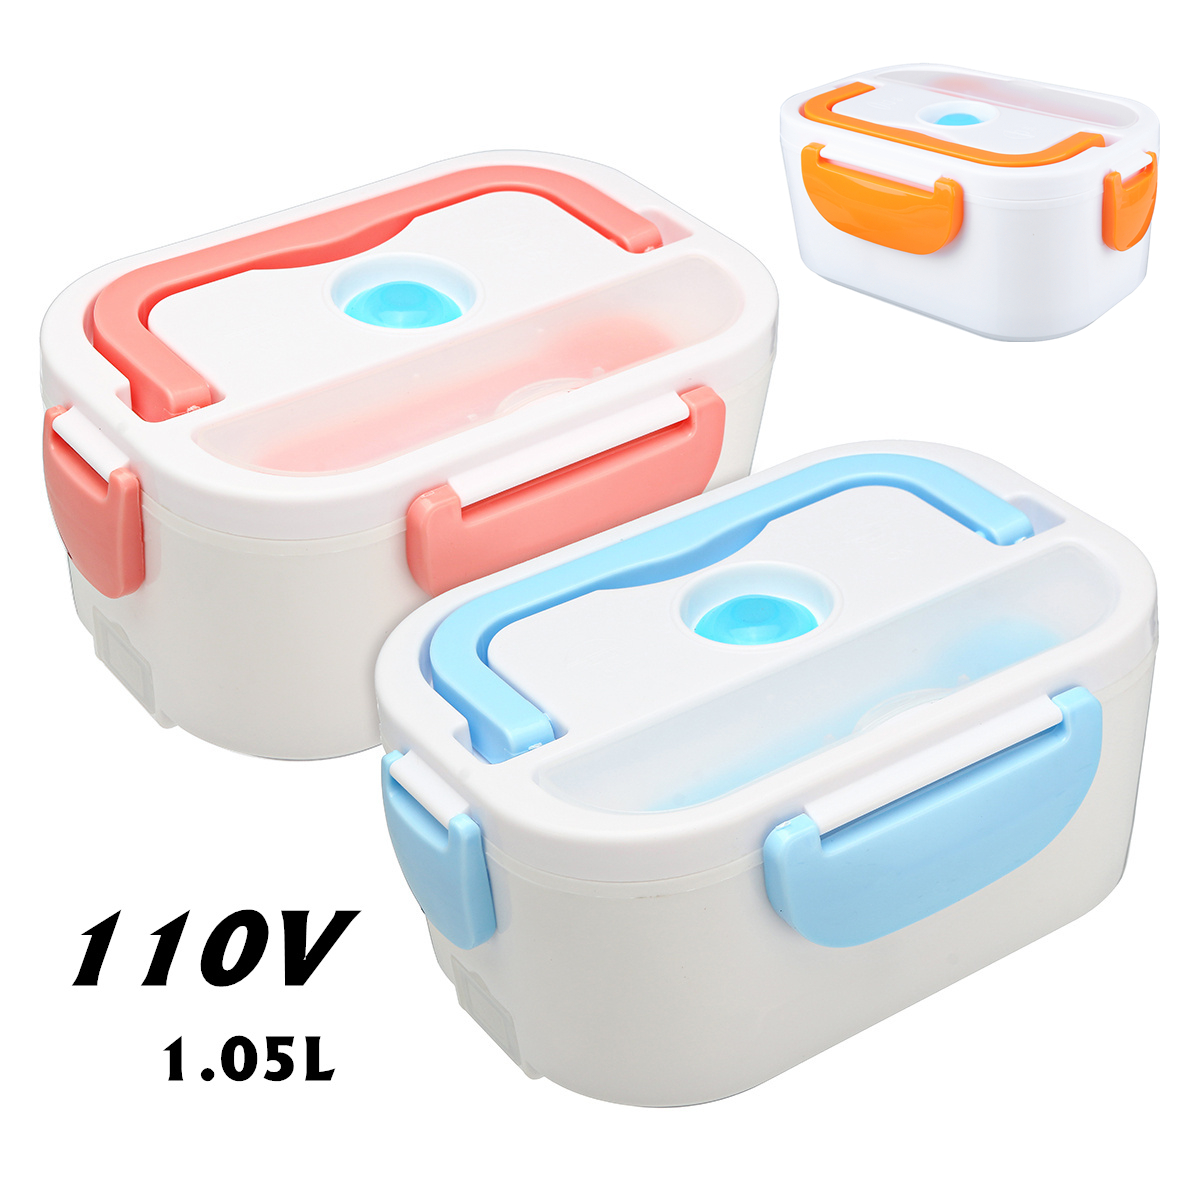 110V-Portable-Electric-Lunch-Box-Steamer-Rice-Cooker-Container-Heat-Preservation-1400151-1